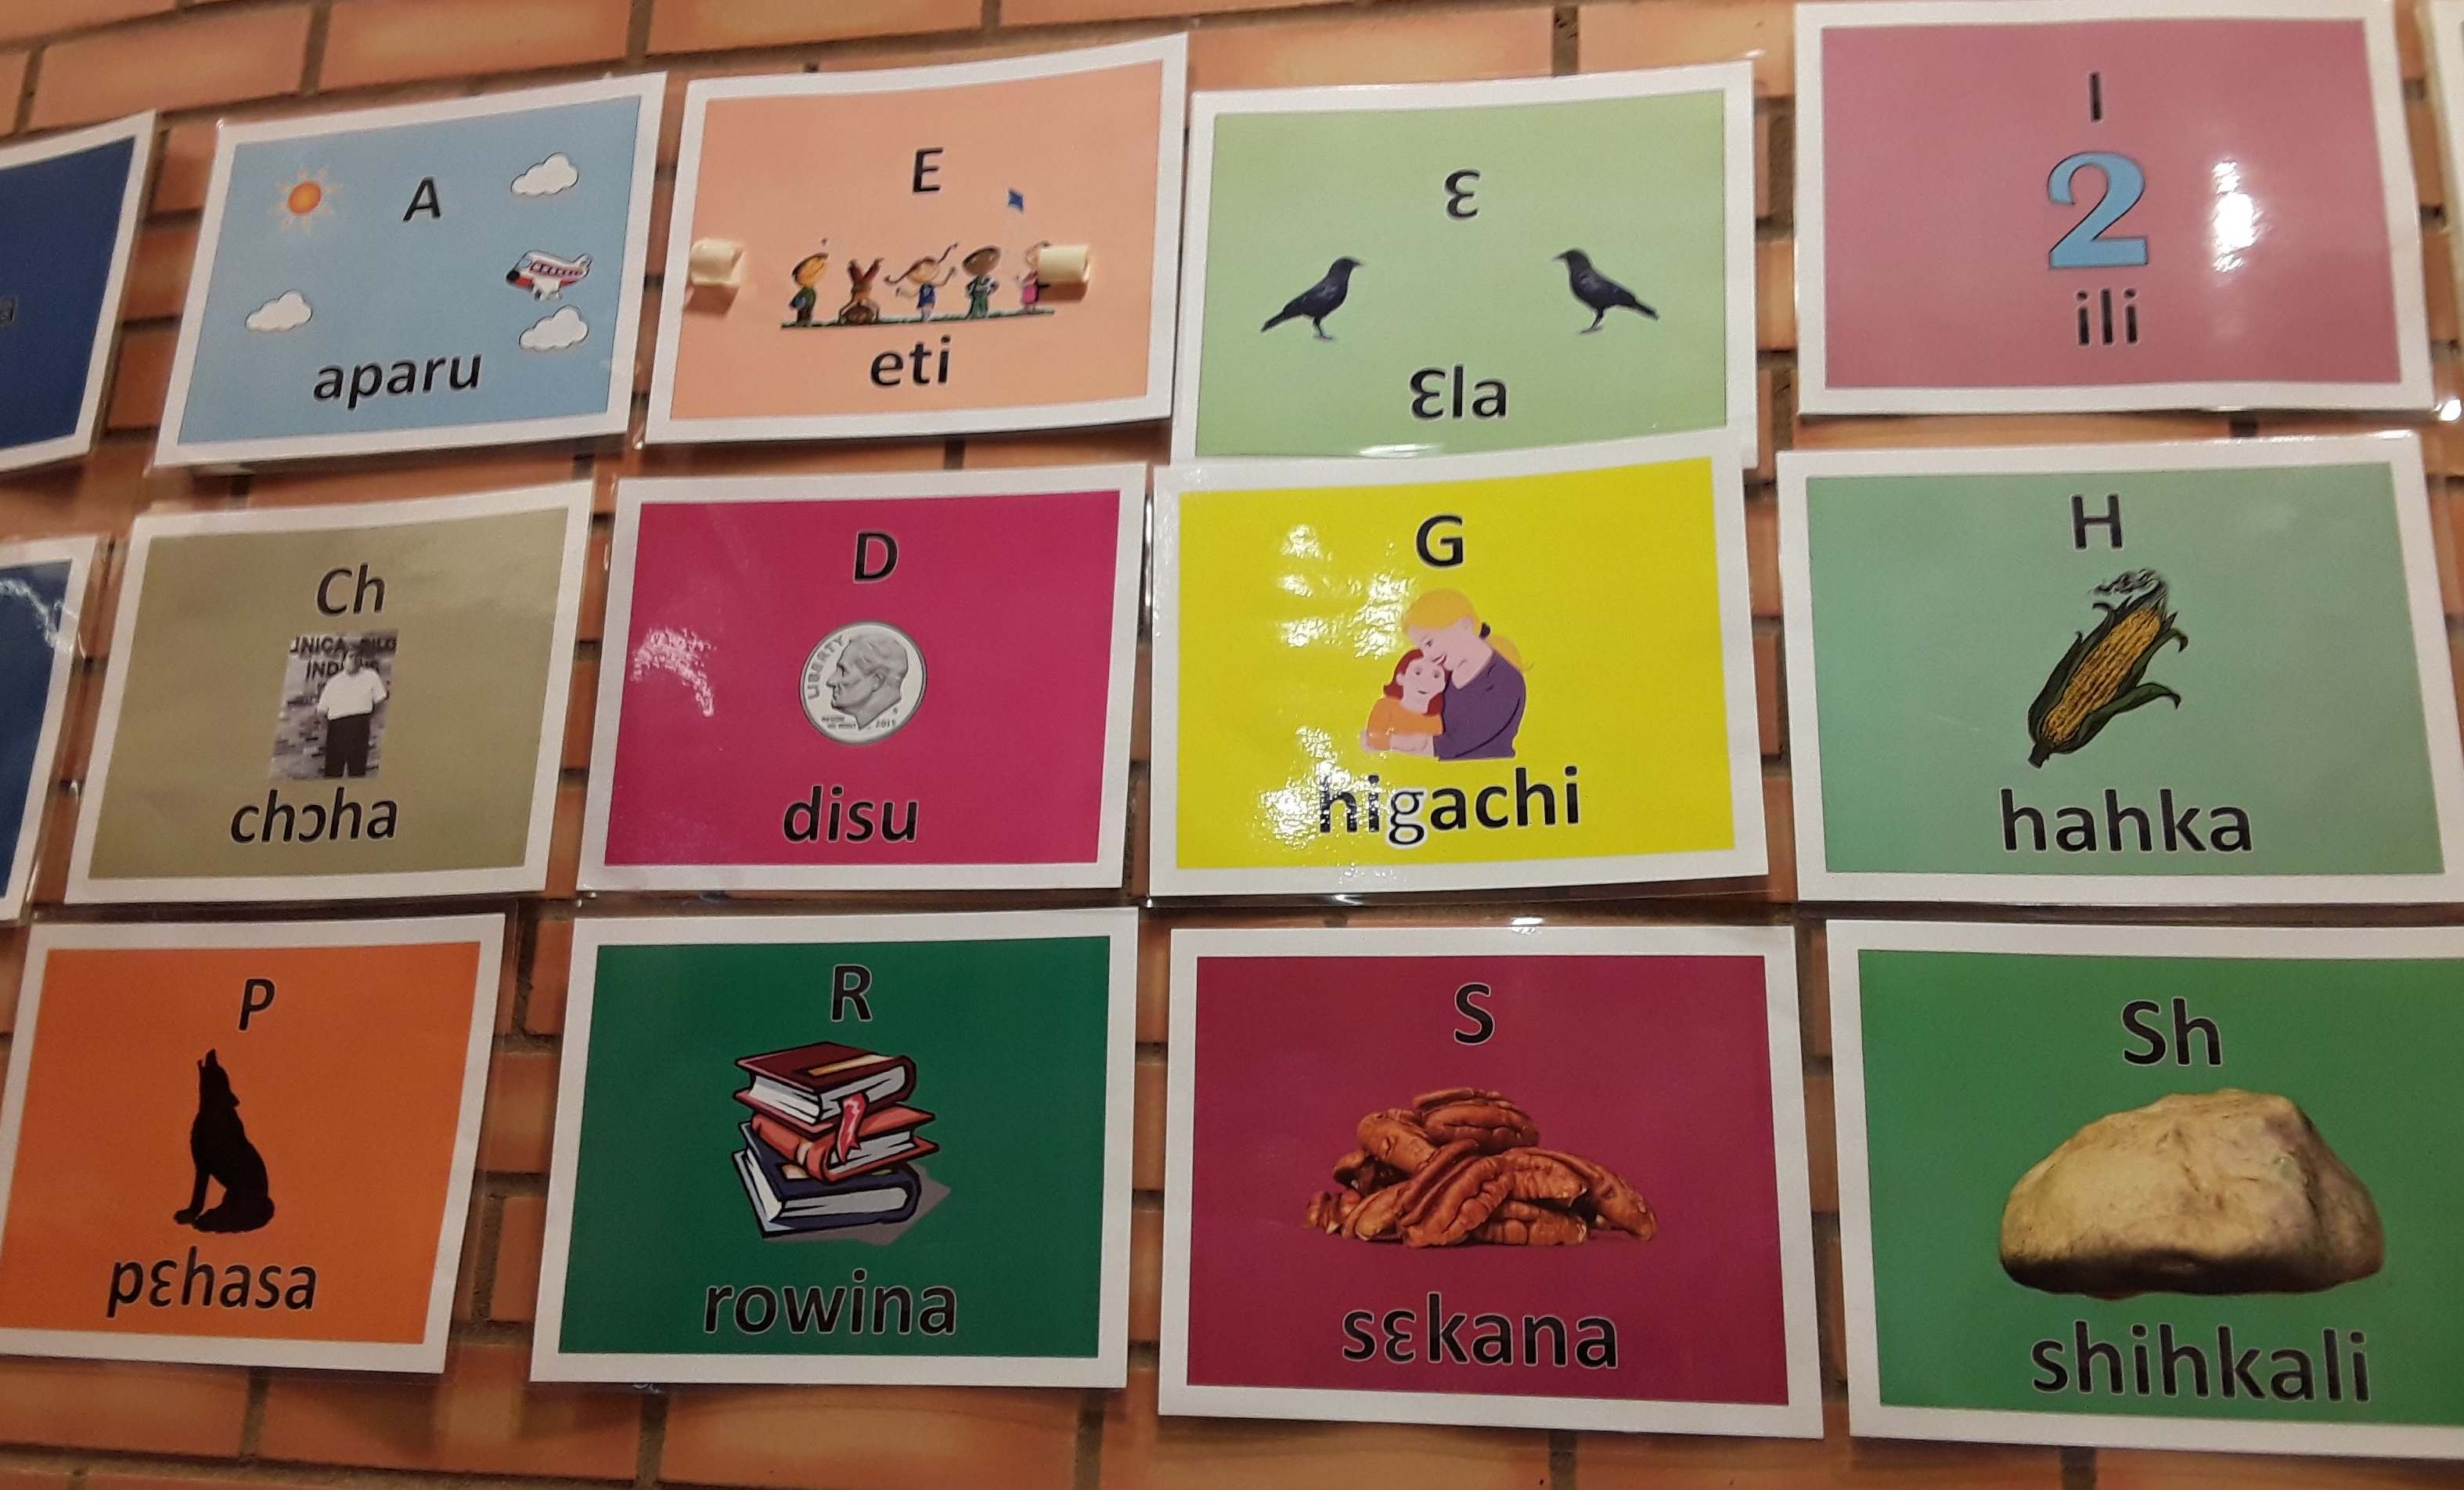 Color image of cards on a wall listing the letters of the Tunica alphabet with example words and pictures.